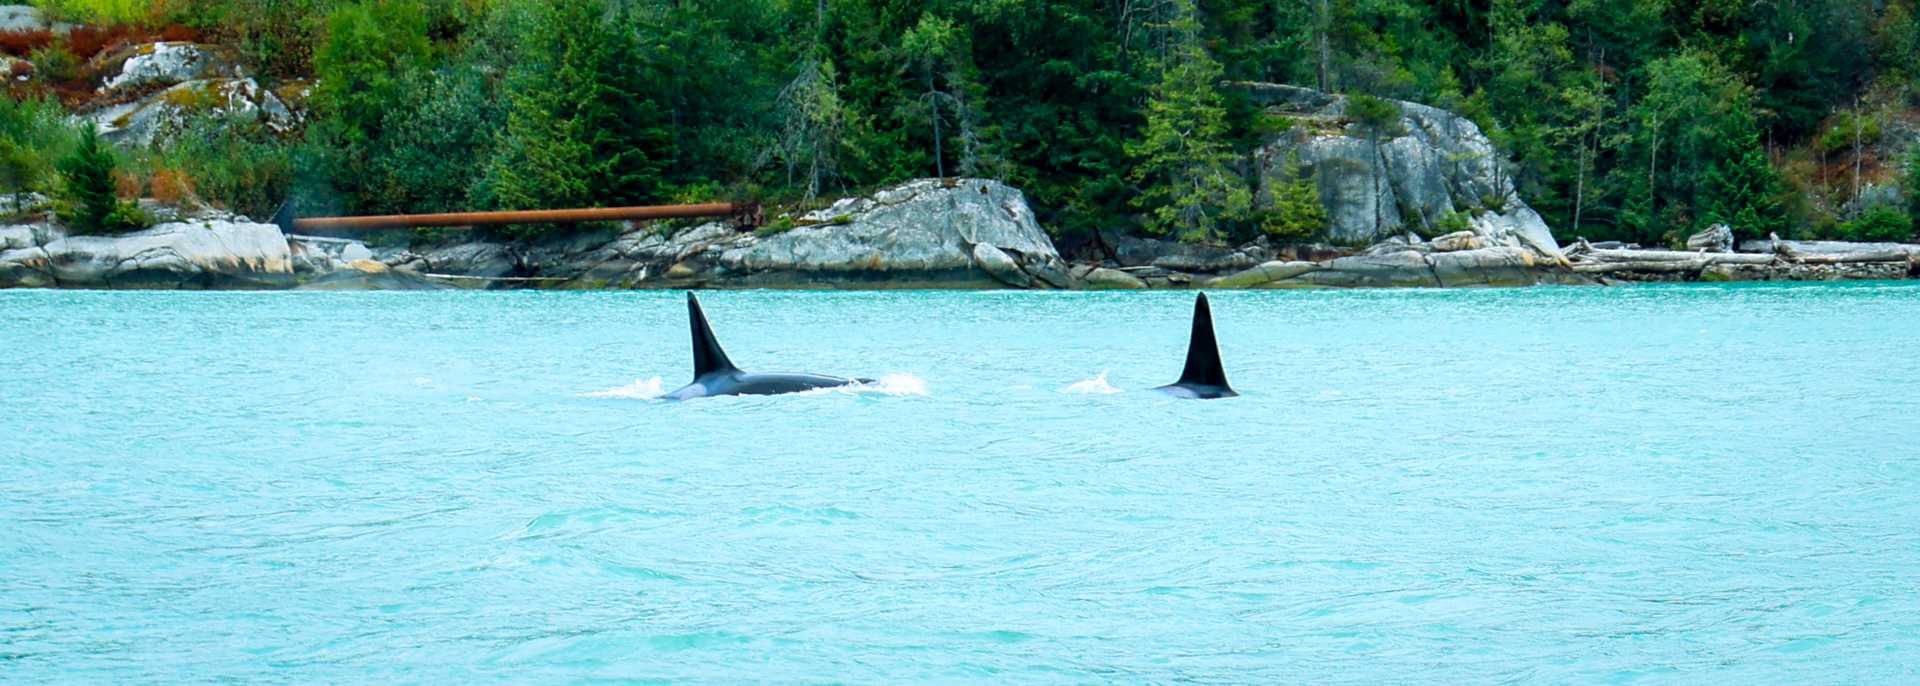 Watching Orca Whales Near Vancouver